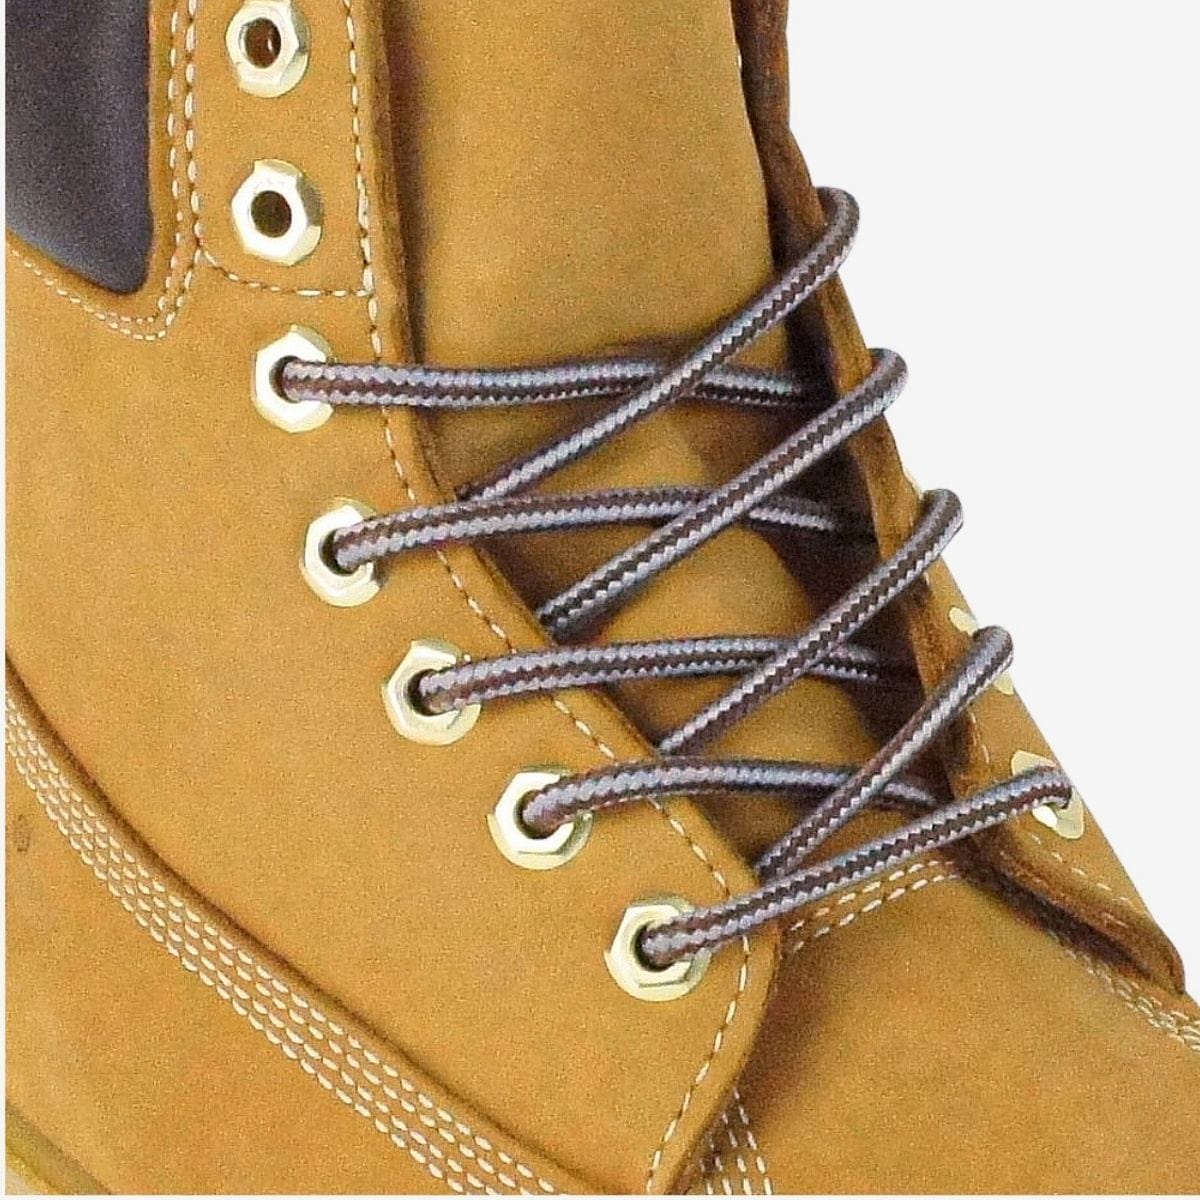 shop-round-shoelaces-online-in-grey-and-brown-for-boots-sneakers-and-running-shoes